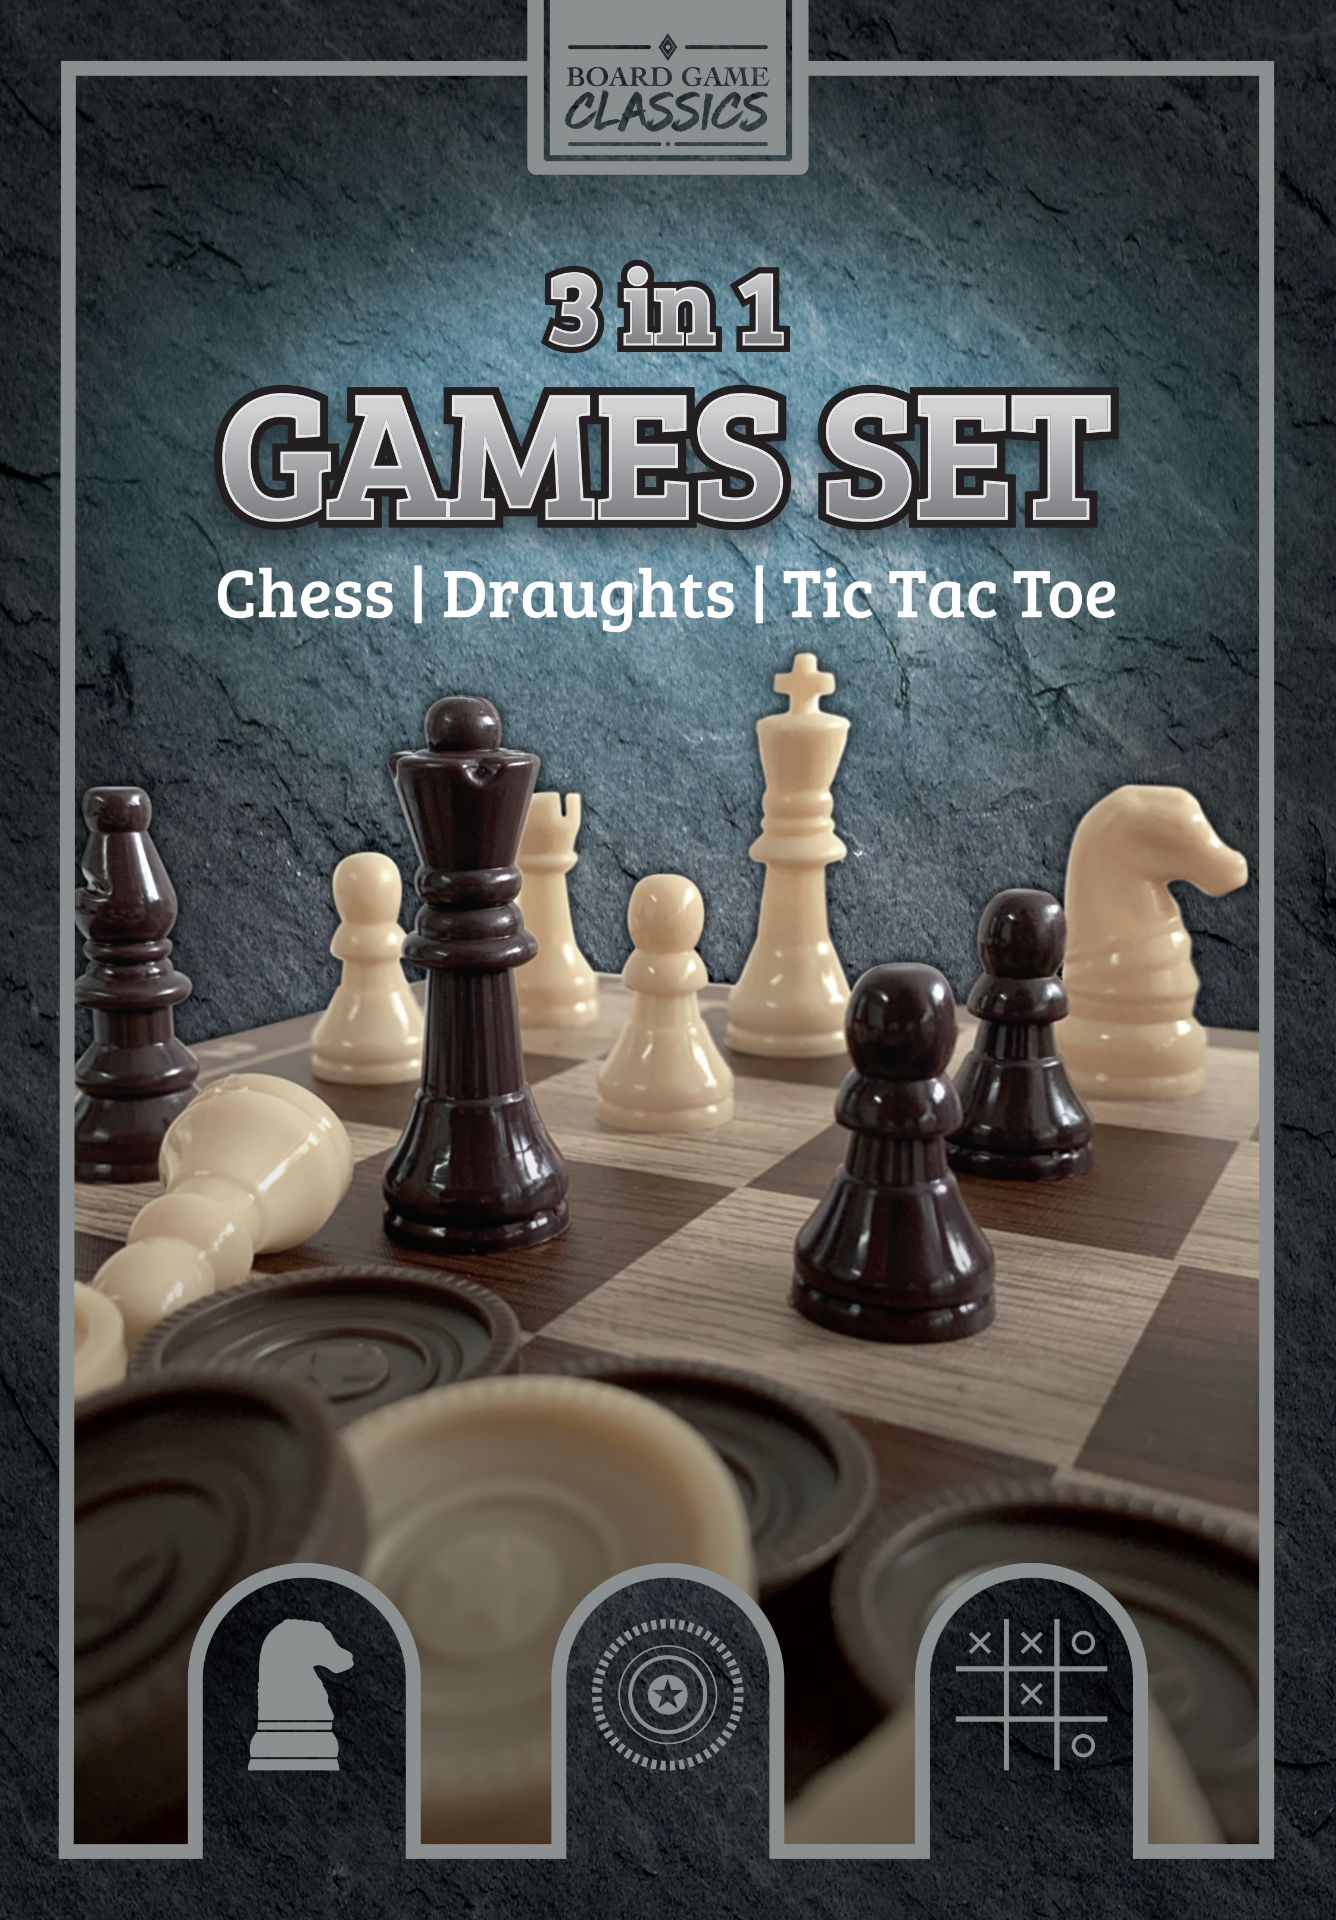 New 3 in 1 Games Set - Chess, Draughts, Tic Tac Toe